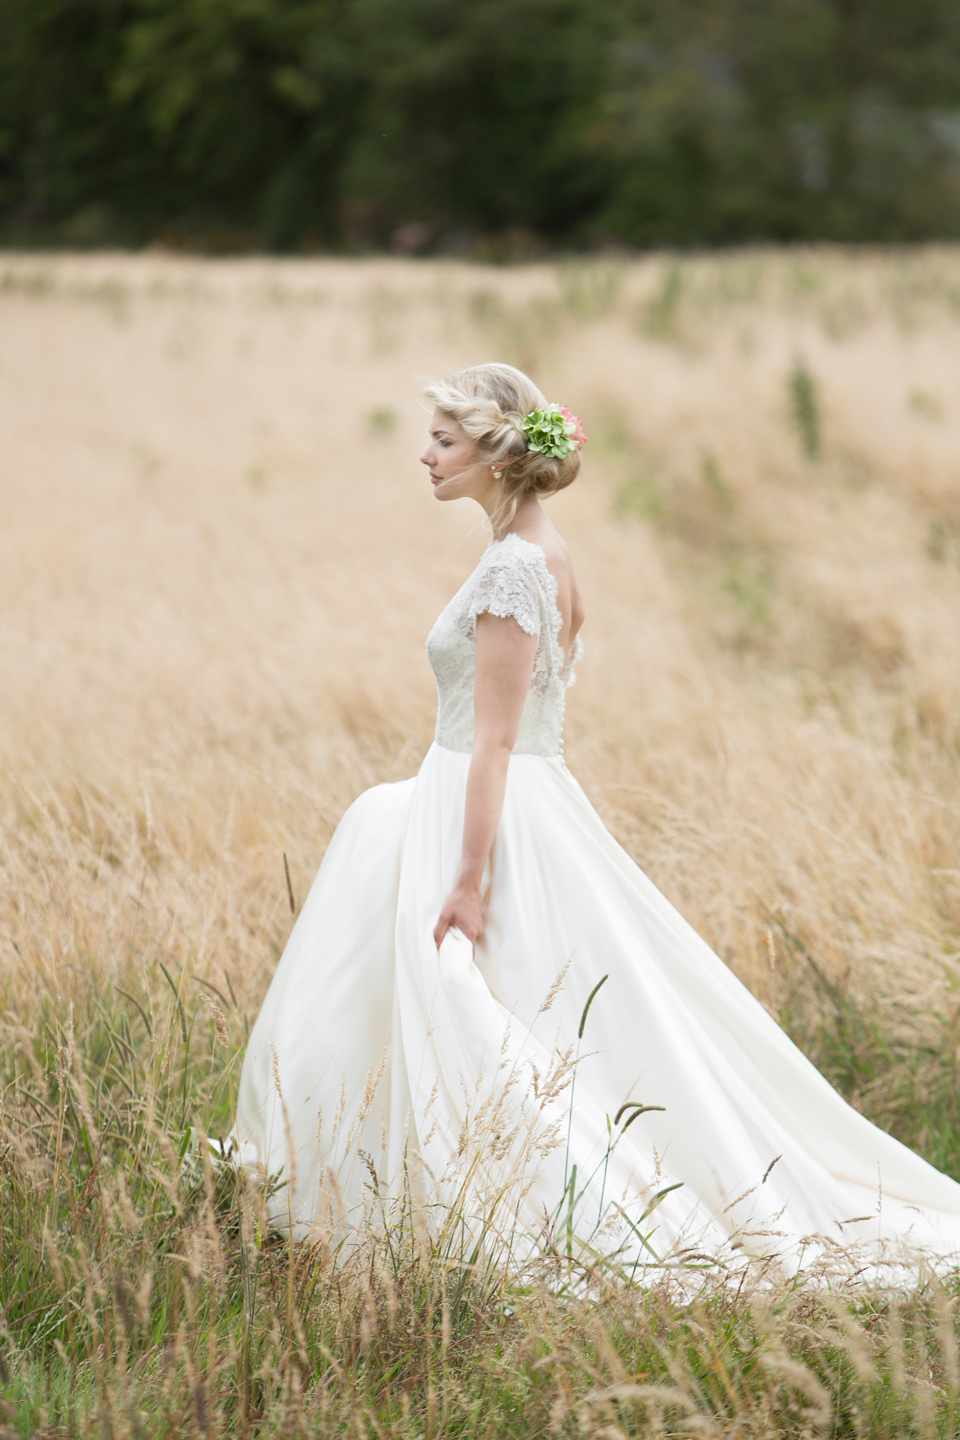 To Be Loved – The Romantic New Bridalwear Collection From Lyn Ashworth by Sarah Barrett.